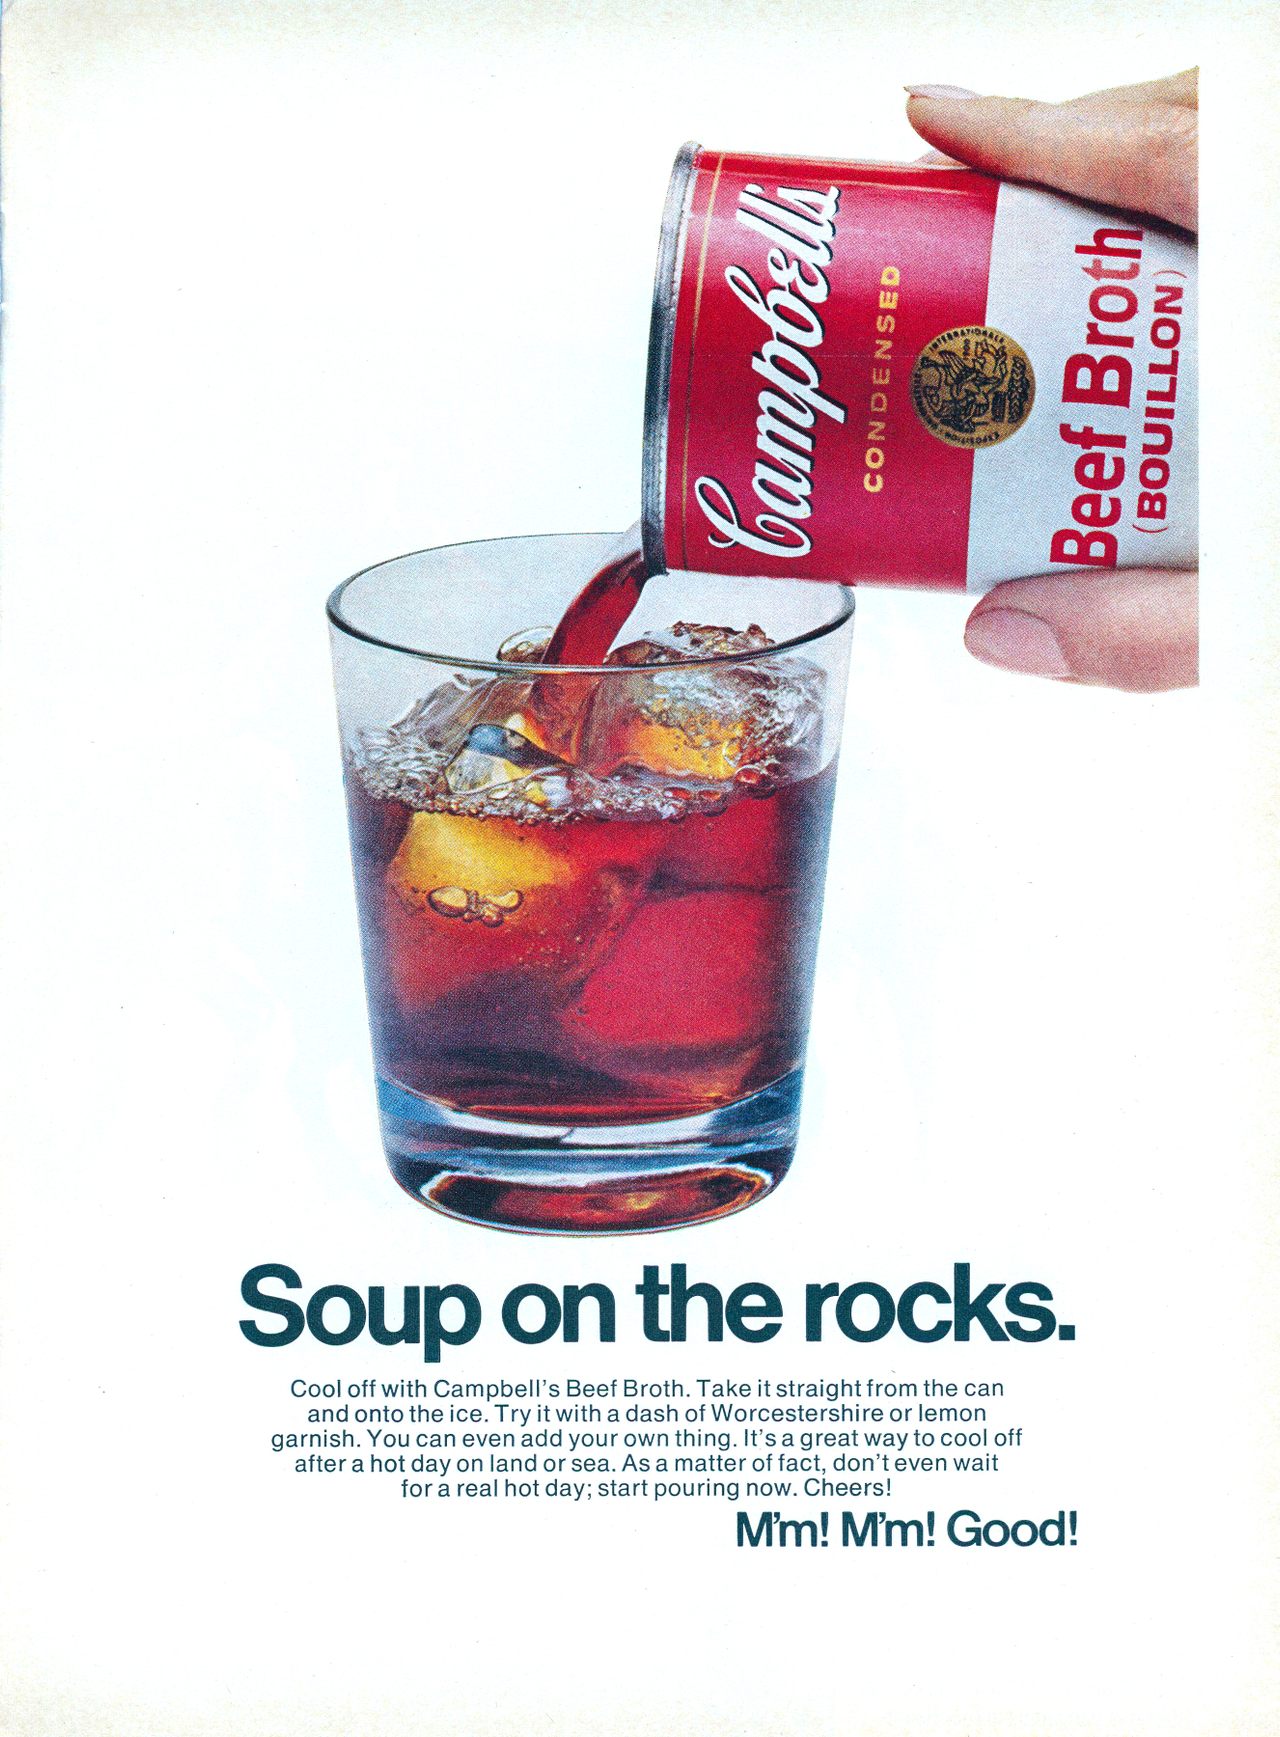 A vintage Campbell's ad from a 1972 issue of <em>Sport Illustrated</em>.